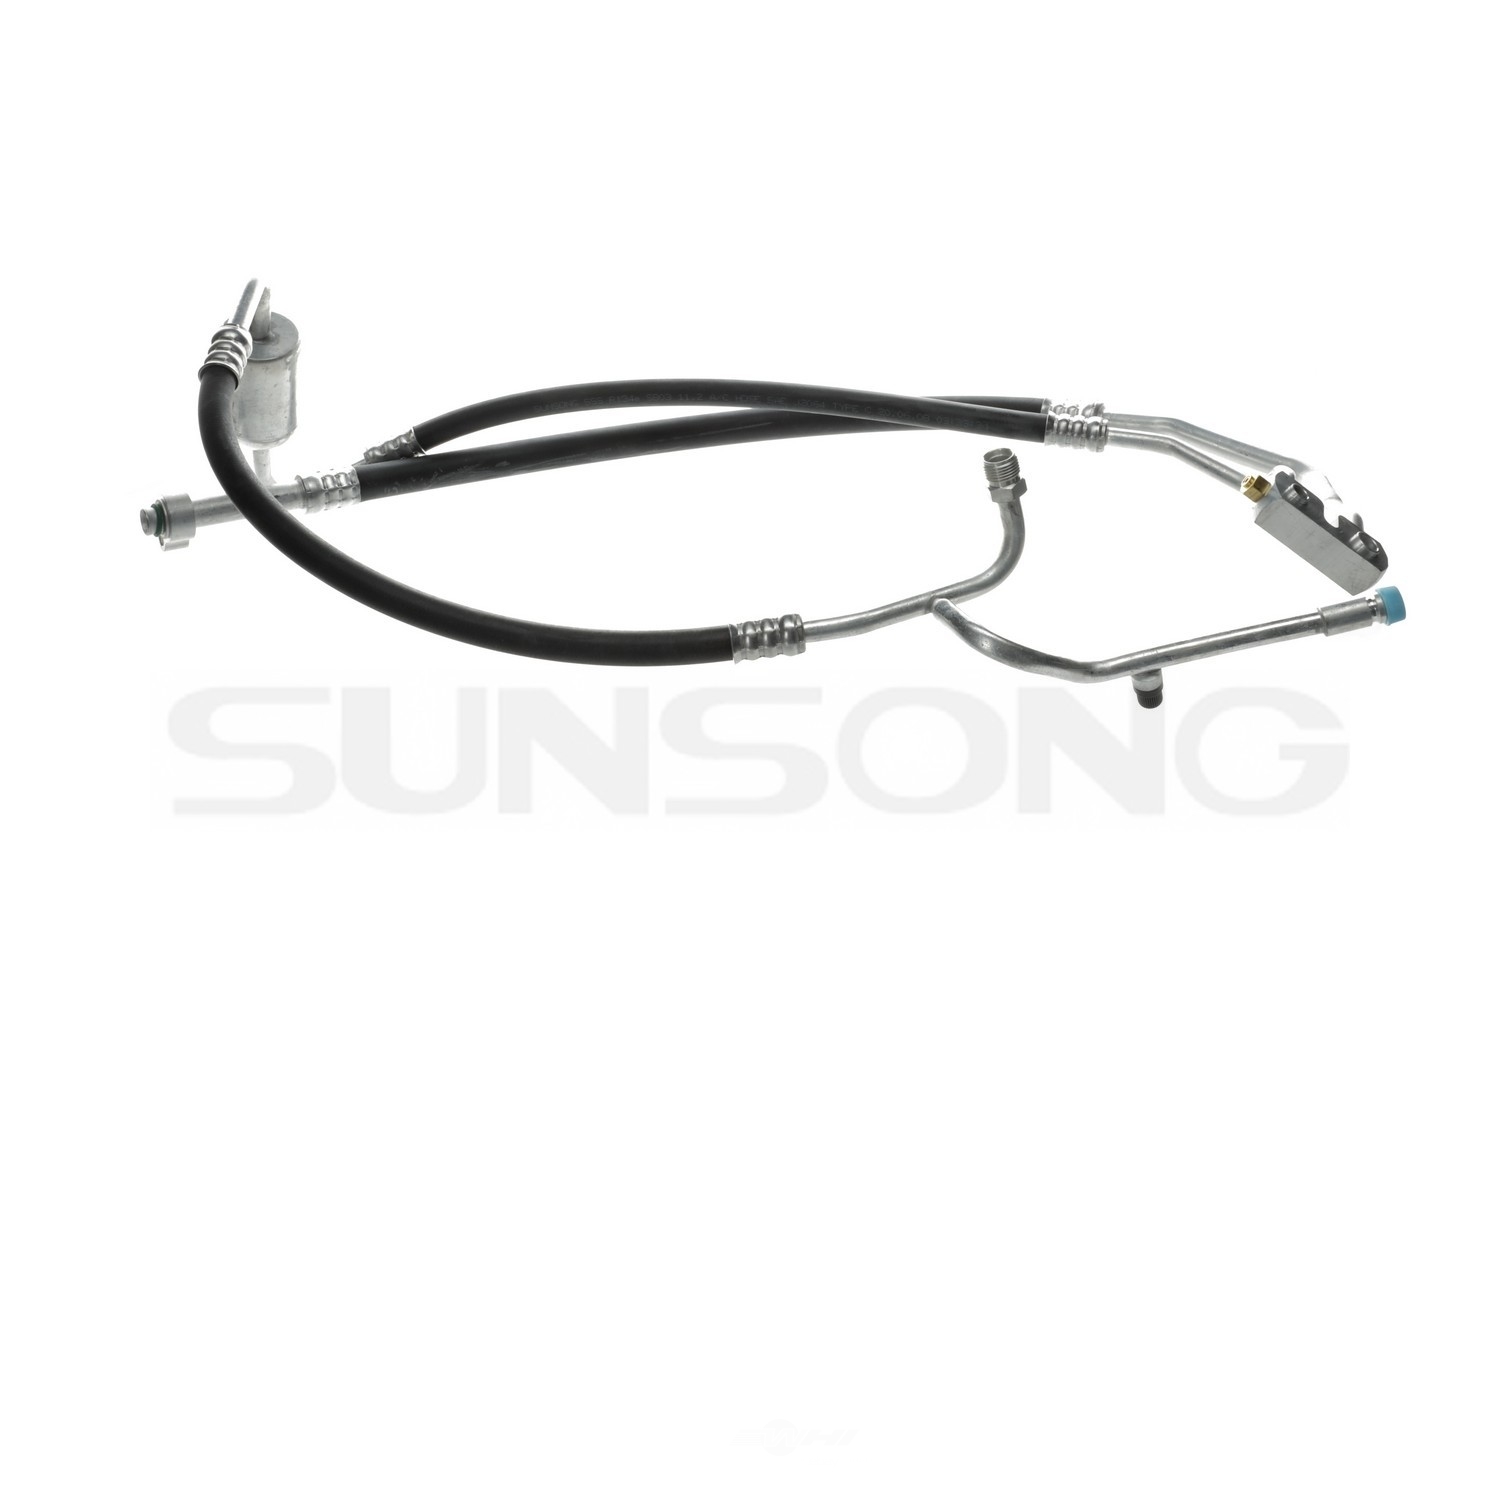 SUNSONG NORTH AMERICA - A/C Refrigerant Discharge / Suction Hose Assembly - SUG 5203064